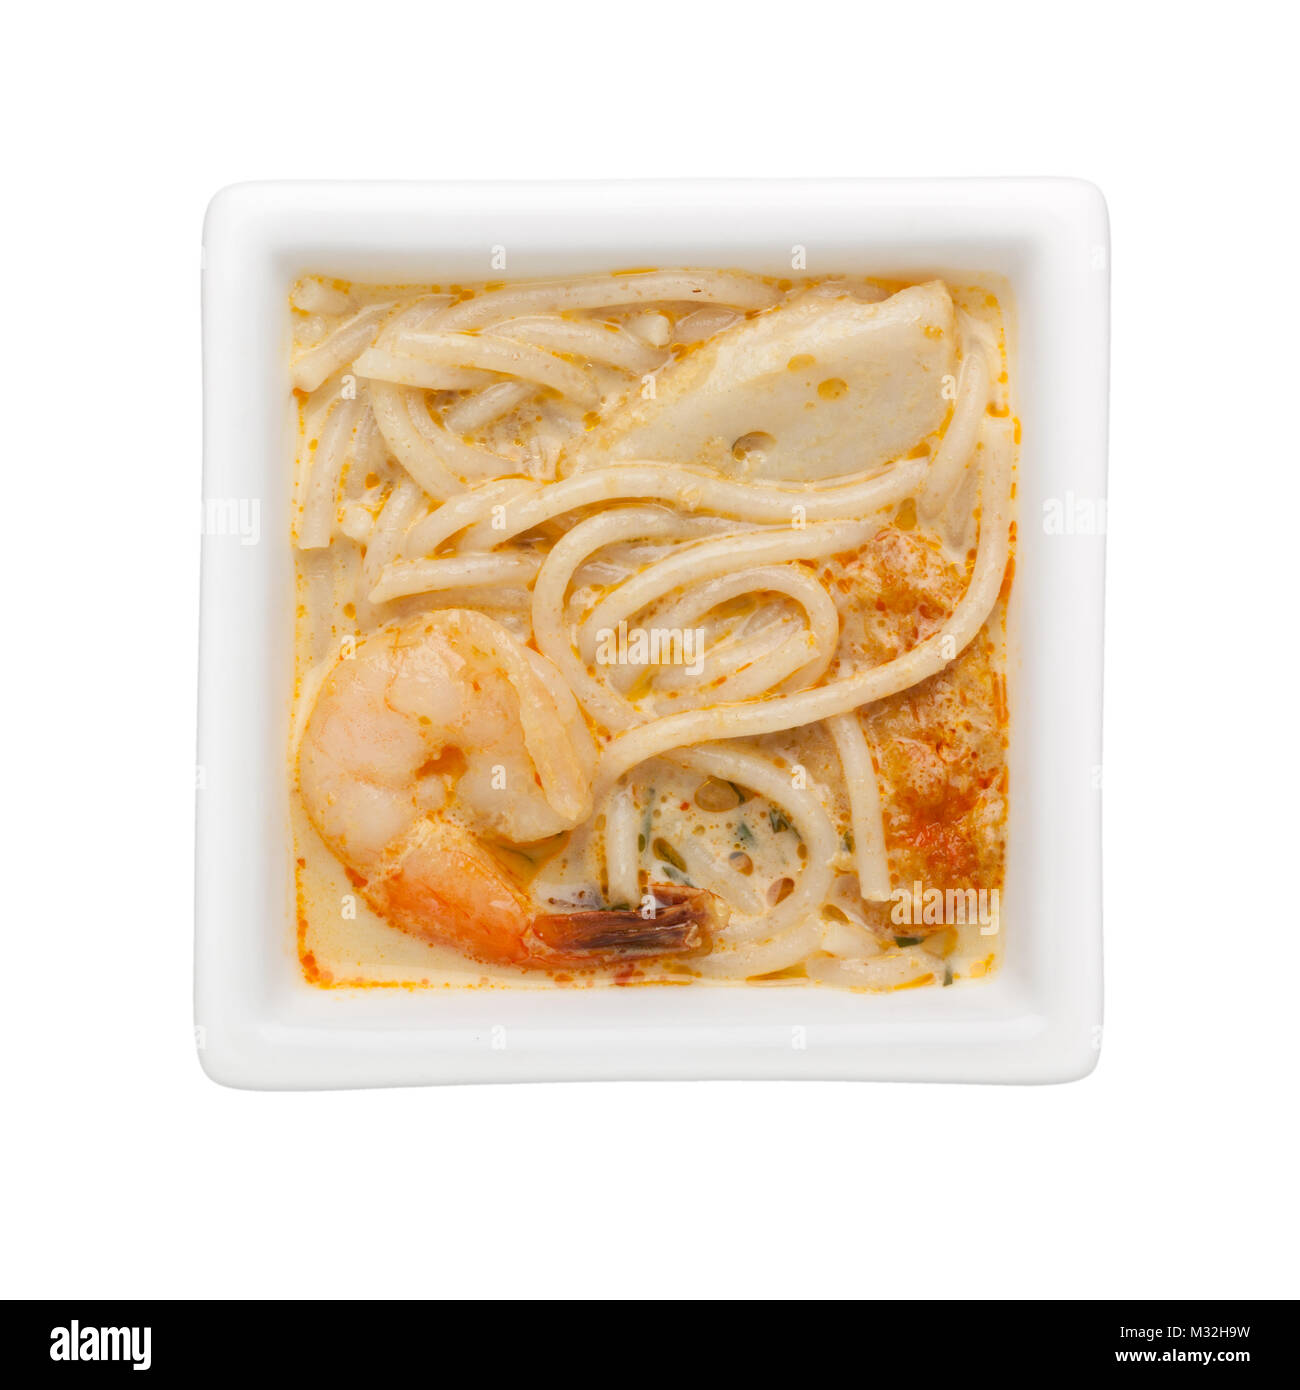 Nonya laksa in a square bowl isolated on white background Stock Photo